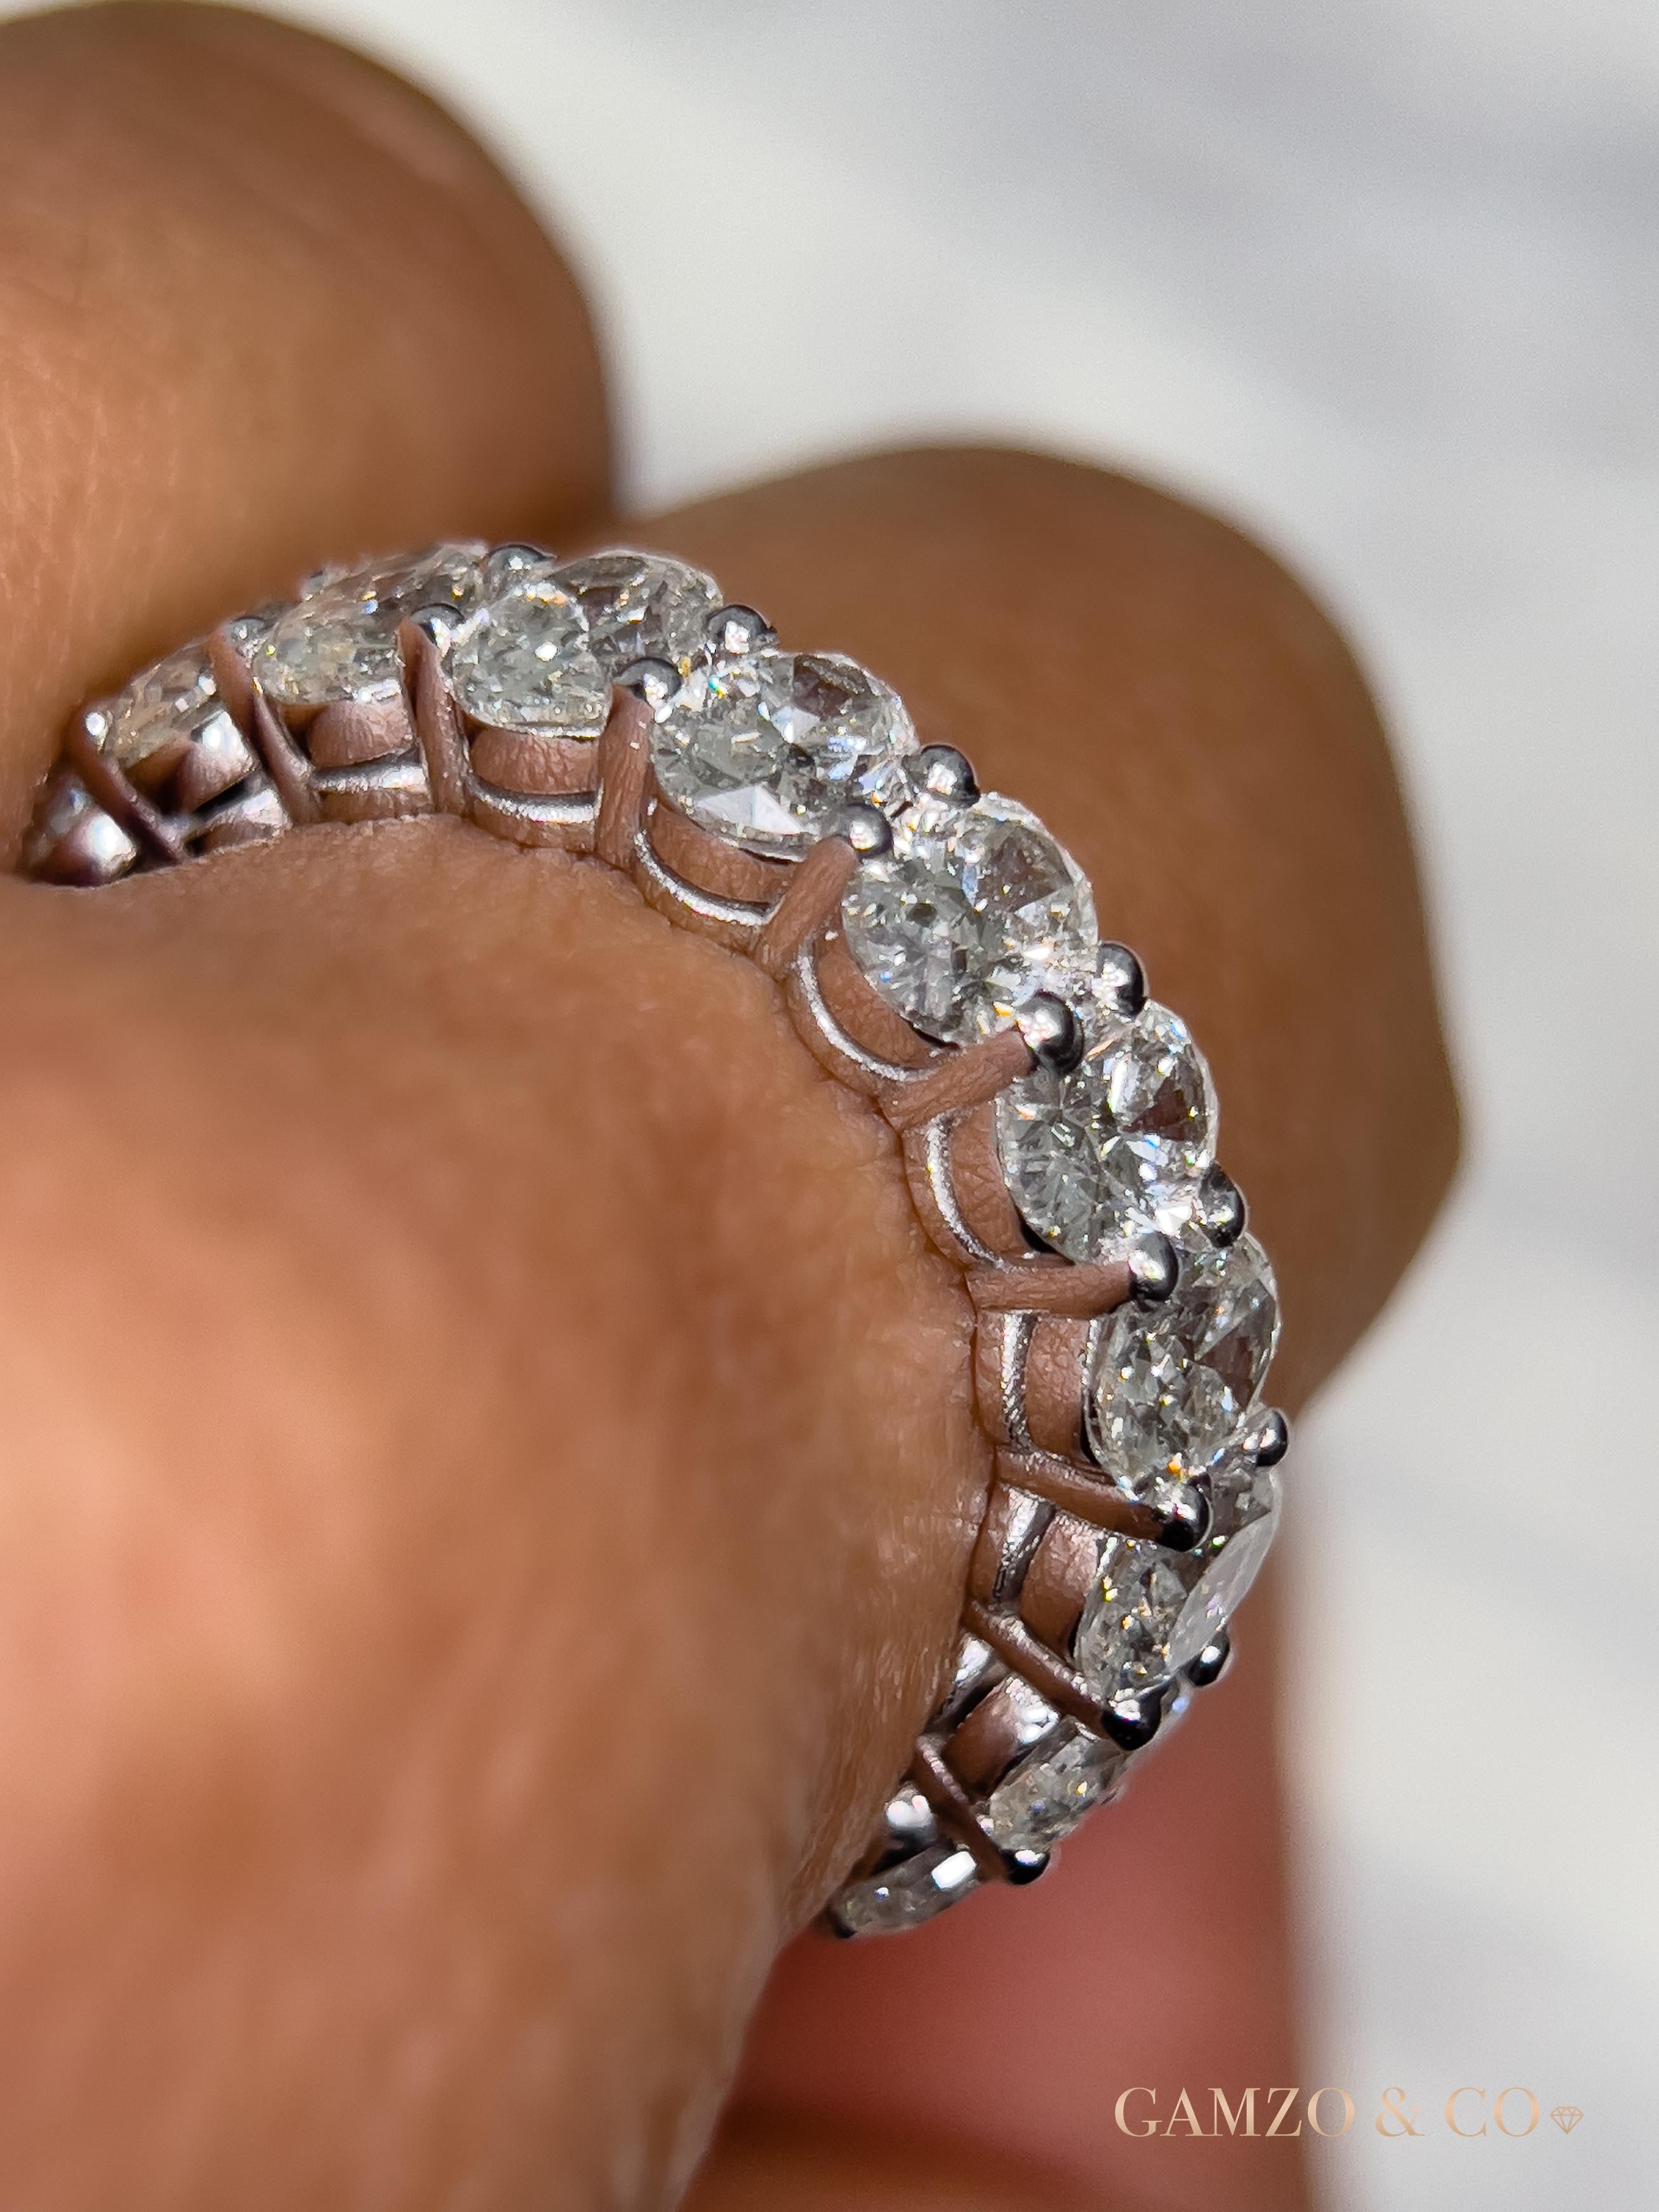 For Sale:  18k White Gold 5 Carat Oval Cut Natural Diamond Eternity Ring 5